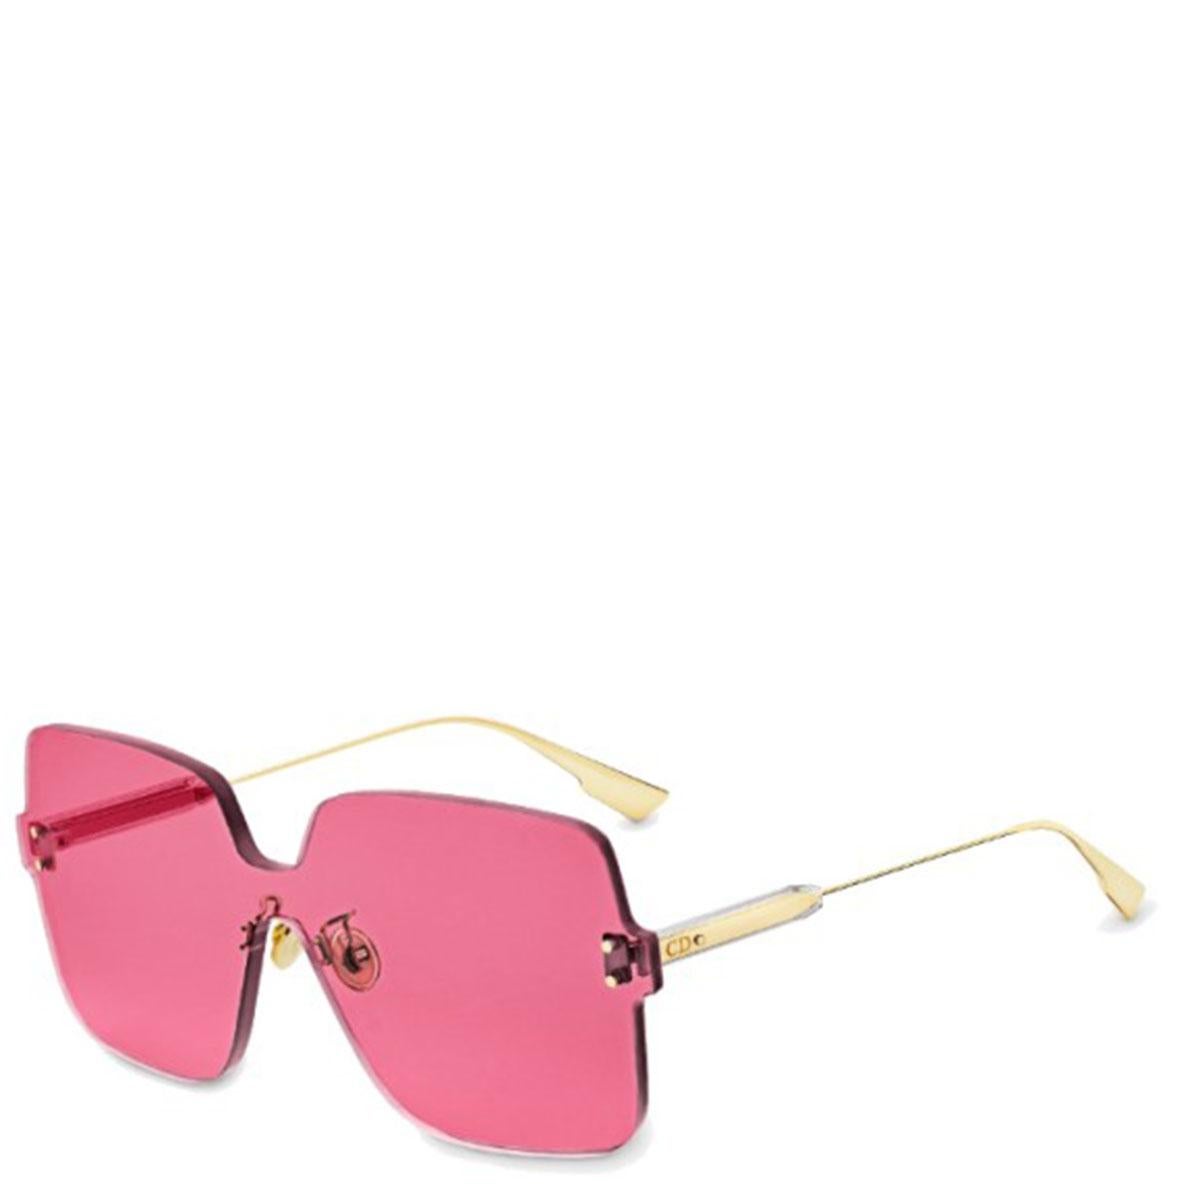 100% authentic Christian Dior 'Color Quate 1' sunglasses with fuchsia pink lenses and gold-tone metal temples. Have been worn and are in excellent condition. Come with case.

Model	MU1U1 145
Width	14.5cm (5.7in)
Height	5.8cm (2.3in)

All our